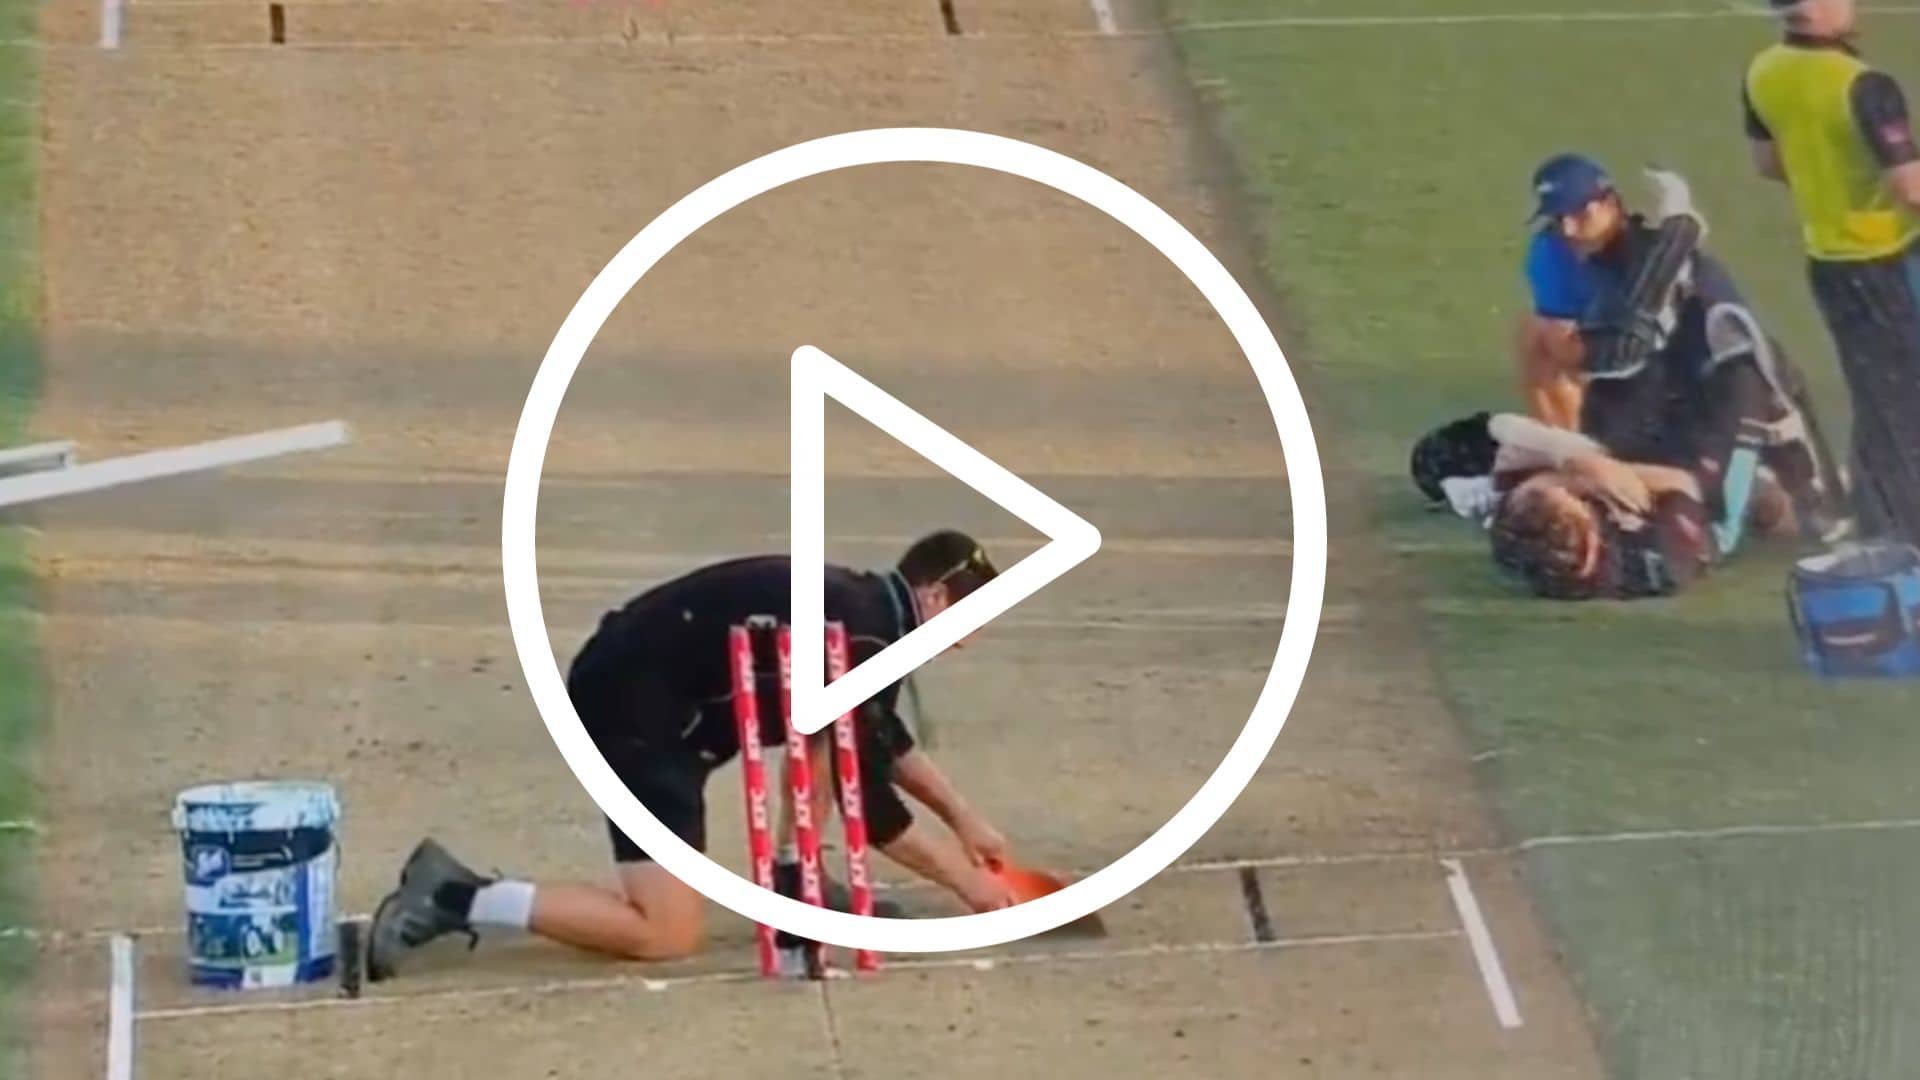 [Watch] Kane Williamson 'Retired Hurt' Vs Pakistan After Struggling With Cramps